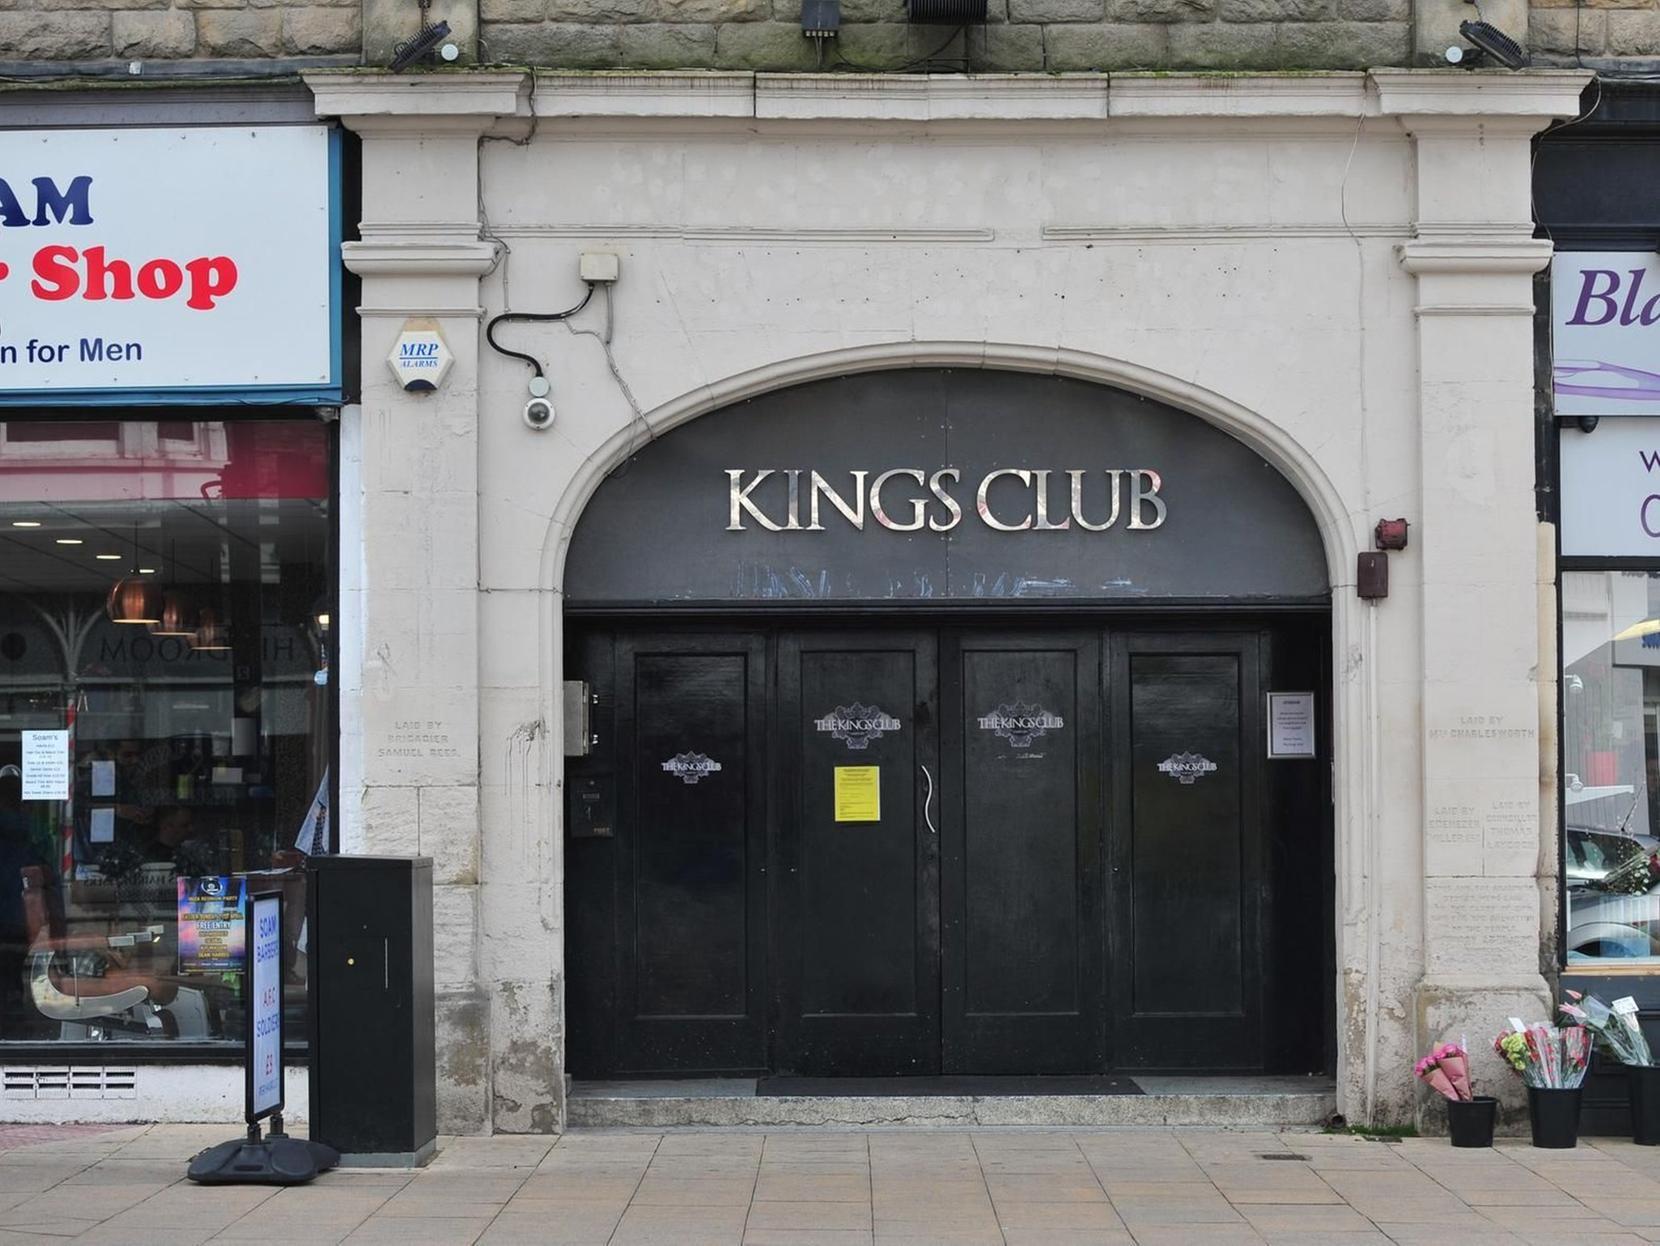 Harrogate strip club in legal standoff with council over sexual entertainment licence